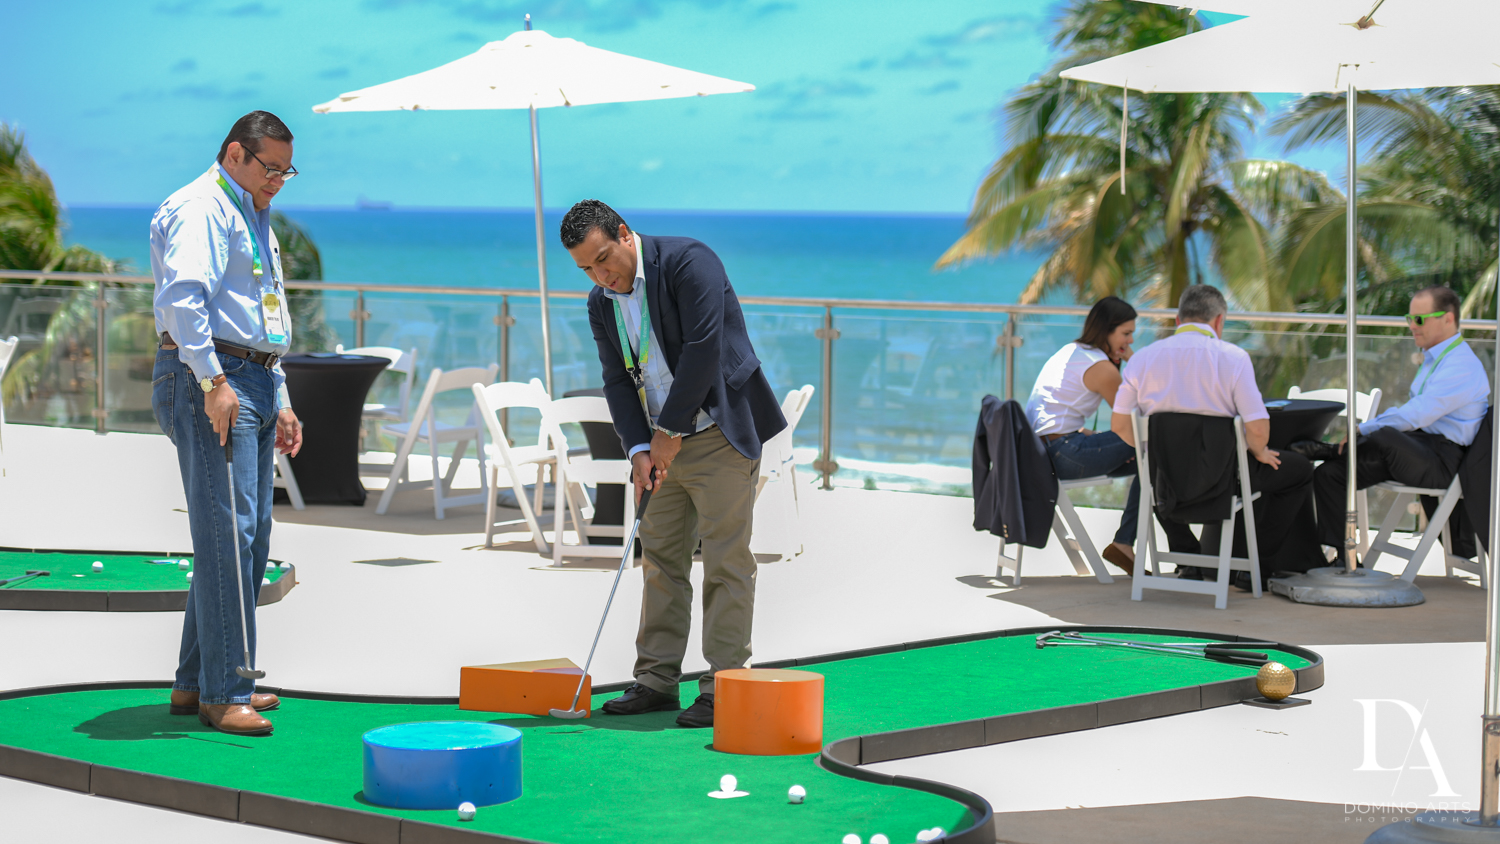 fun activities at Fintech Americas Banking Conference Miami by Domino Arts Photography